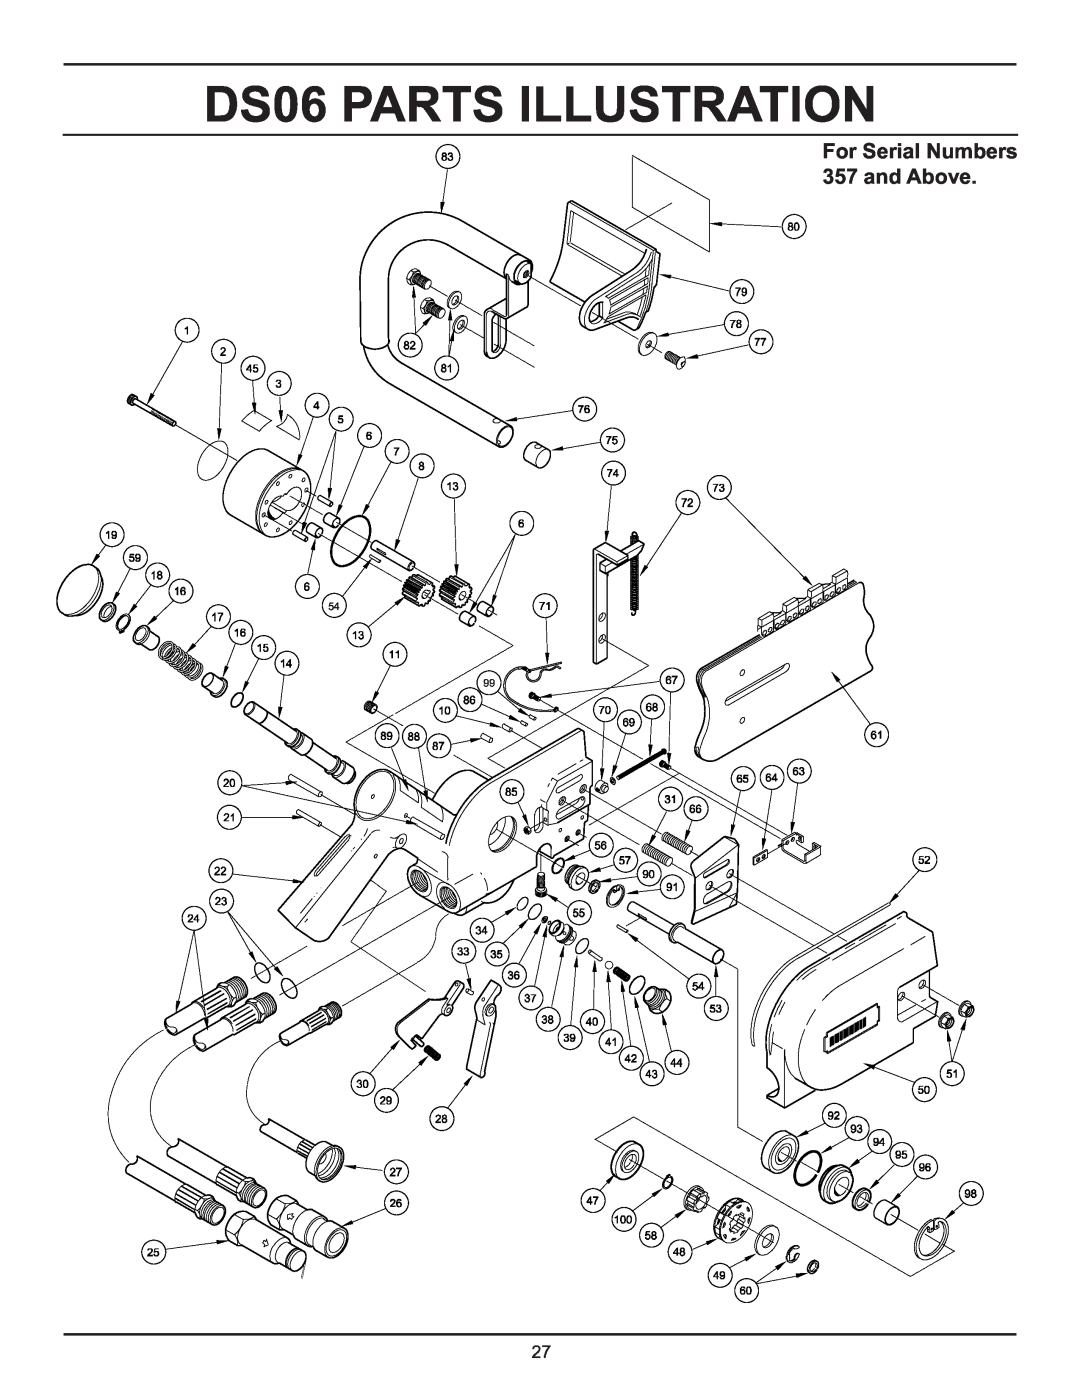 Stanley Black & Decker manual DS06 PARTS ILLUSTRATION, For Serial Numbers 357 and Above 